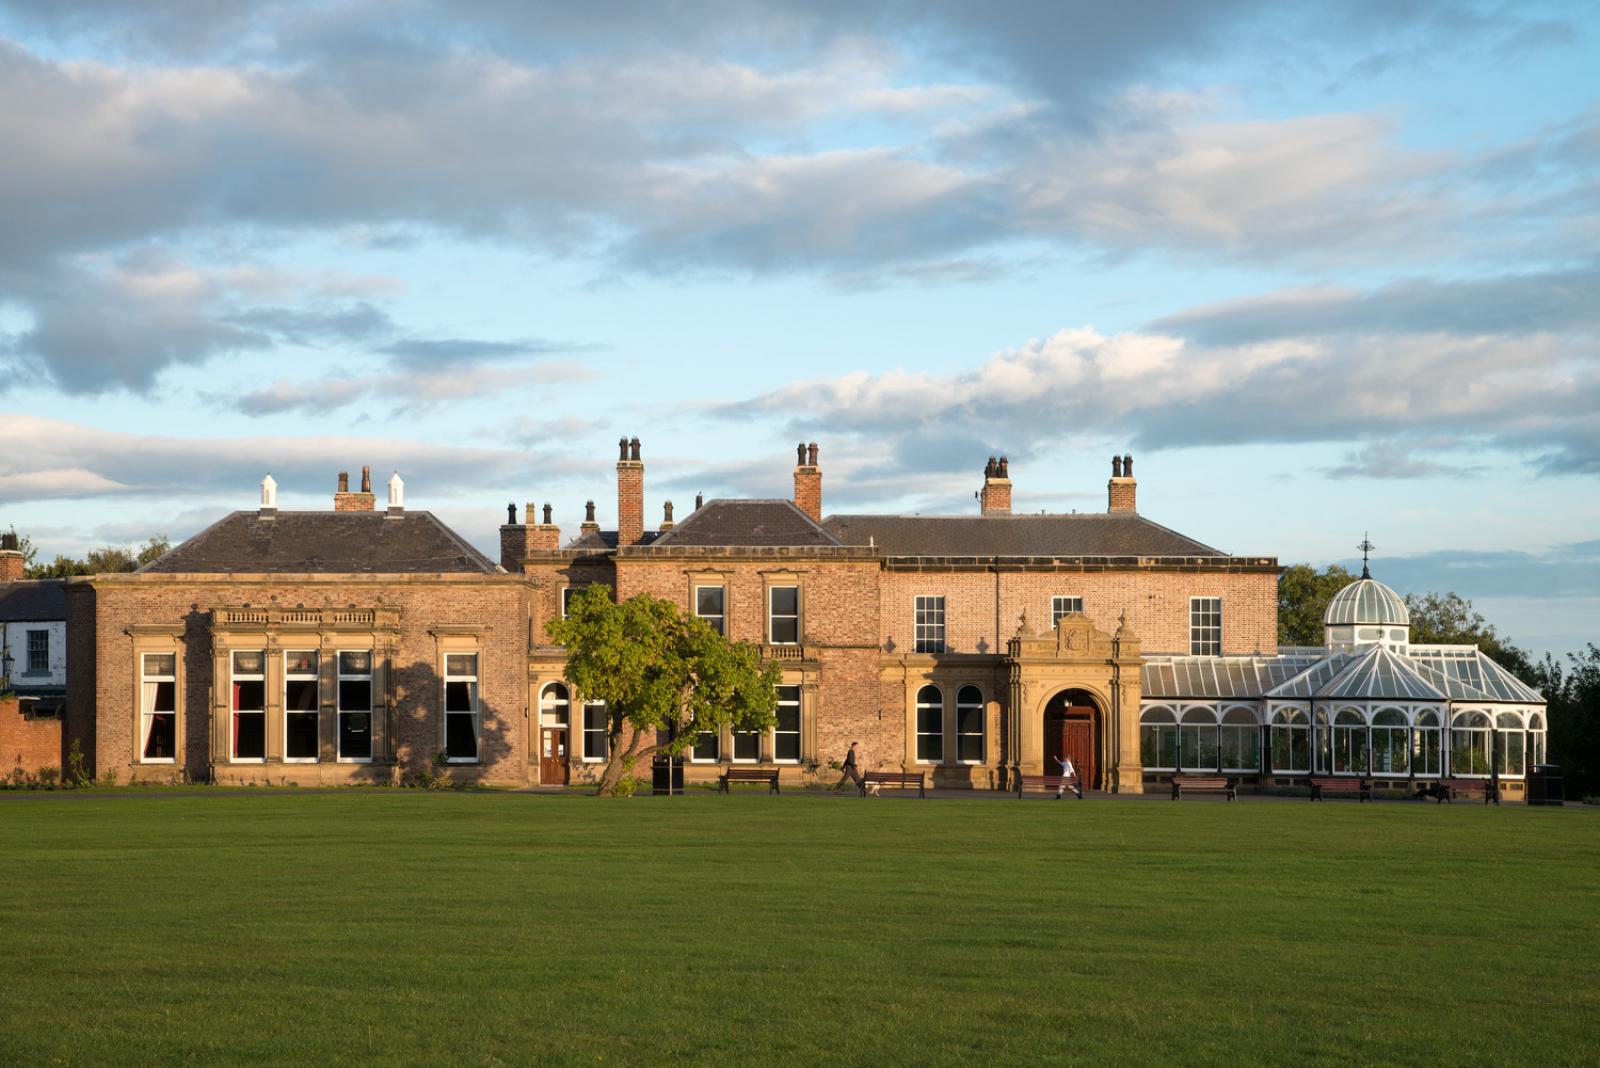 Exterior image of the Grade II listed Preston Park Museum.